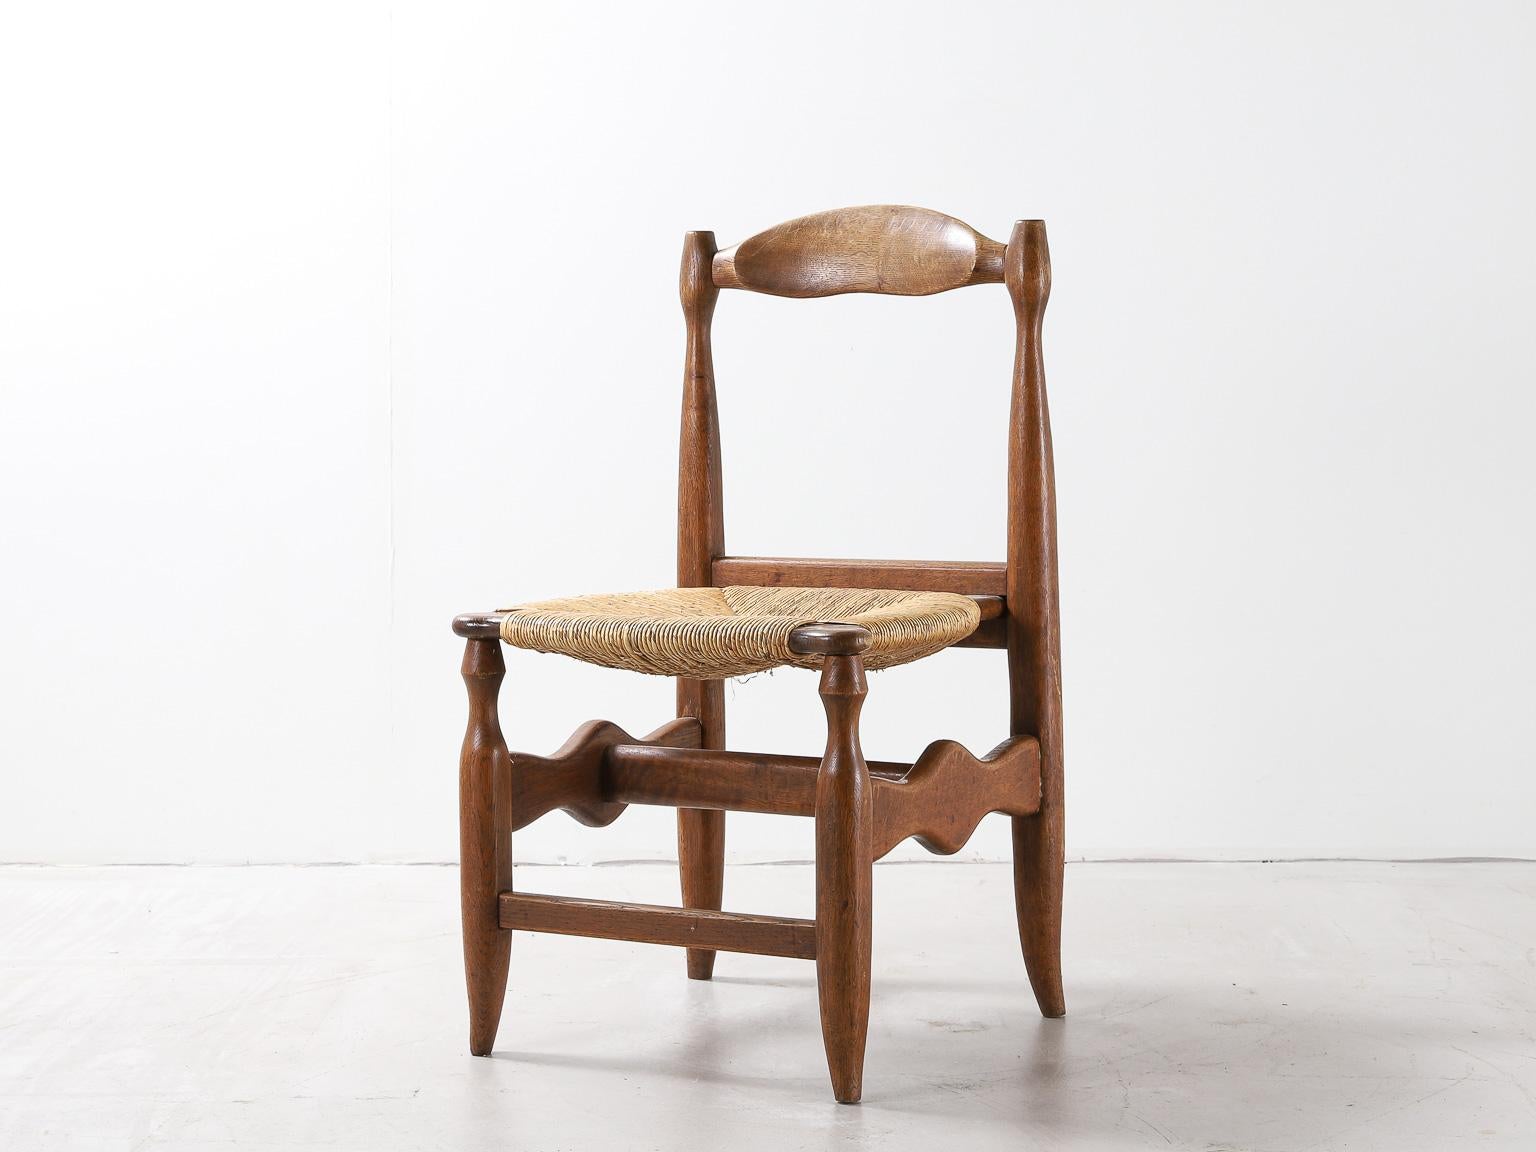 Set of 5 Guillerme et Chambron oak and rush chairs

Set of five elegant dining chairs in solid oak by Guillerme and Chambron. These chairs show the characteristic frame of this French designer duo. Beautiful patina on the wood paired with the raw